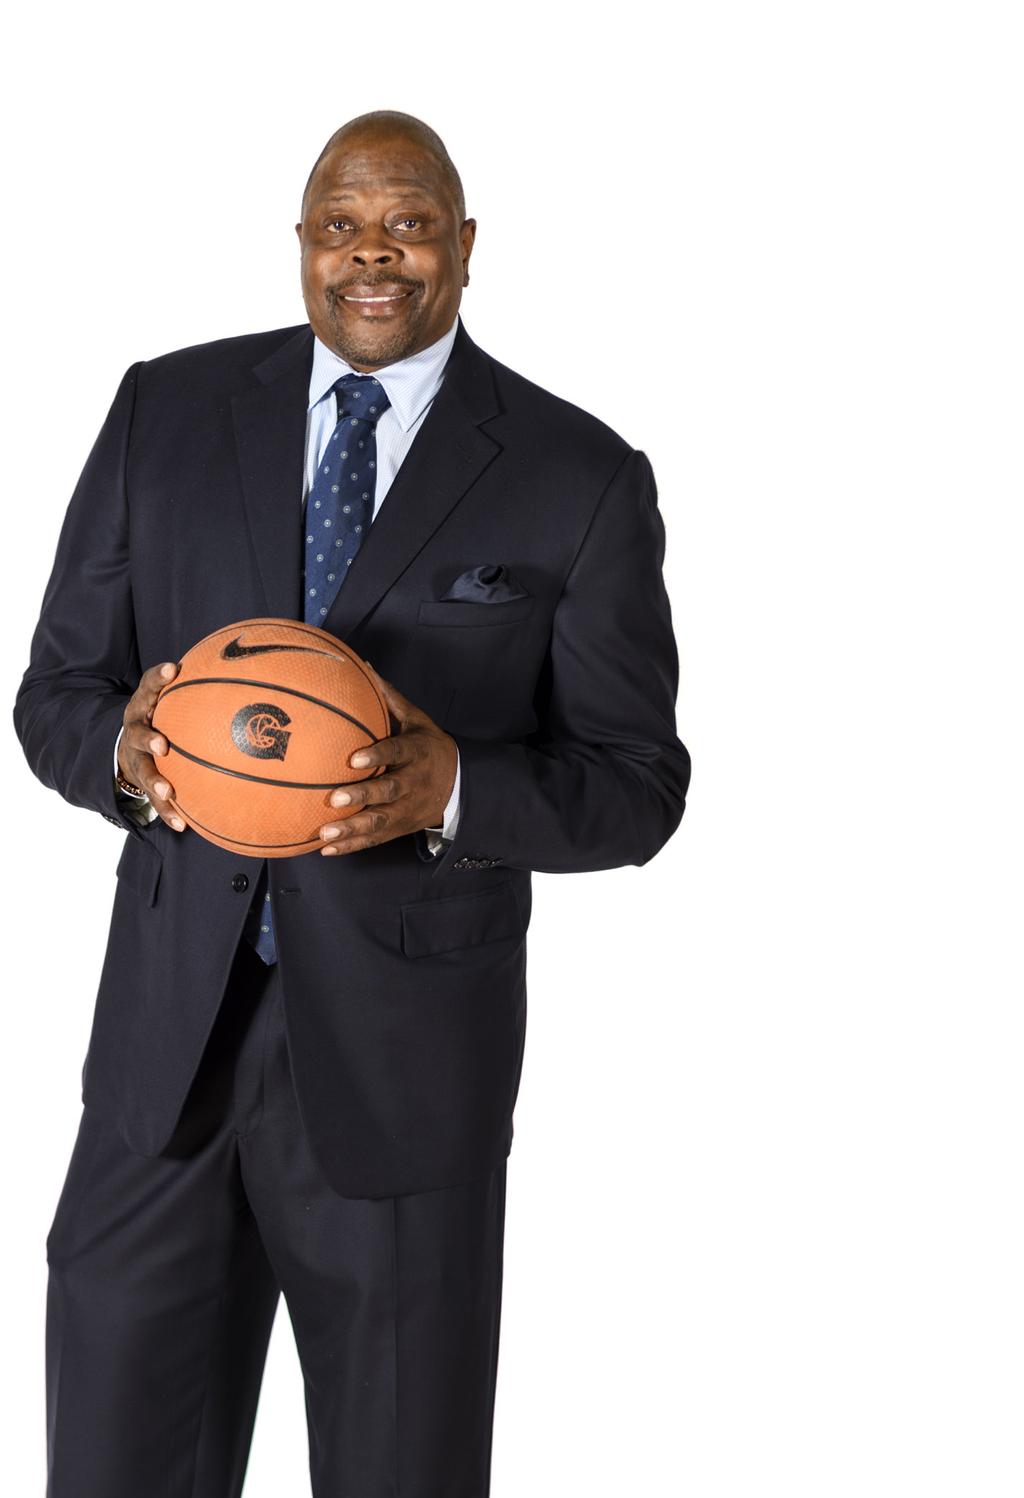 PATRICK EWING HEAD COACH SECOND SEASON GEORGETOWN C 85 Georgetown University announced on April 3, 2017 that Patrick Ewing (C 85) named its new head men s basketball coach.